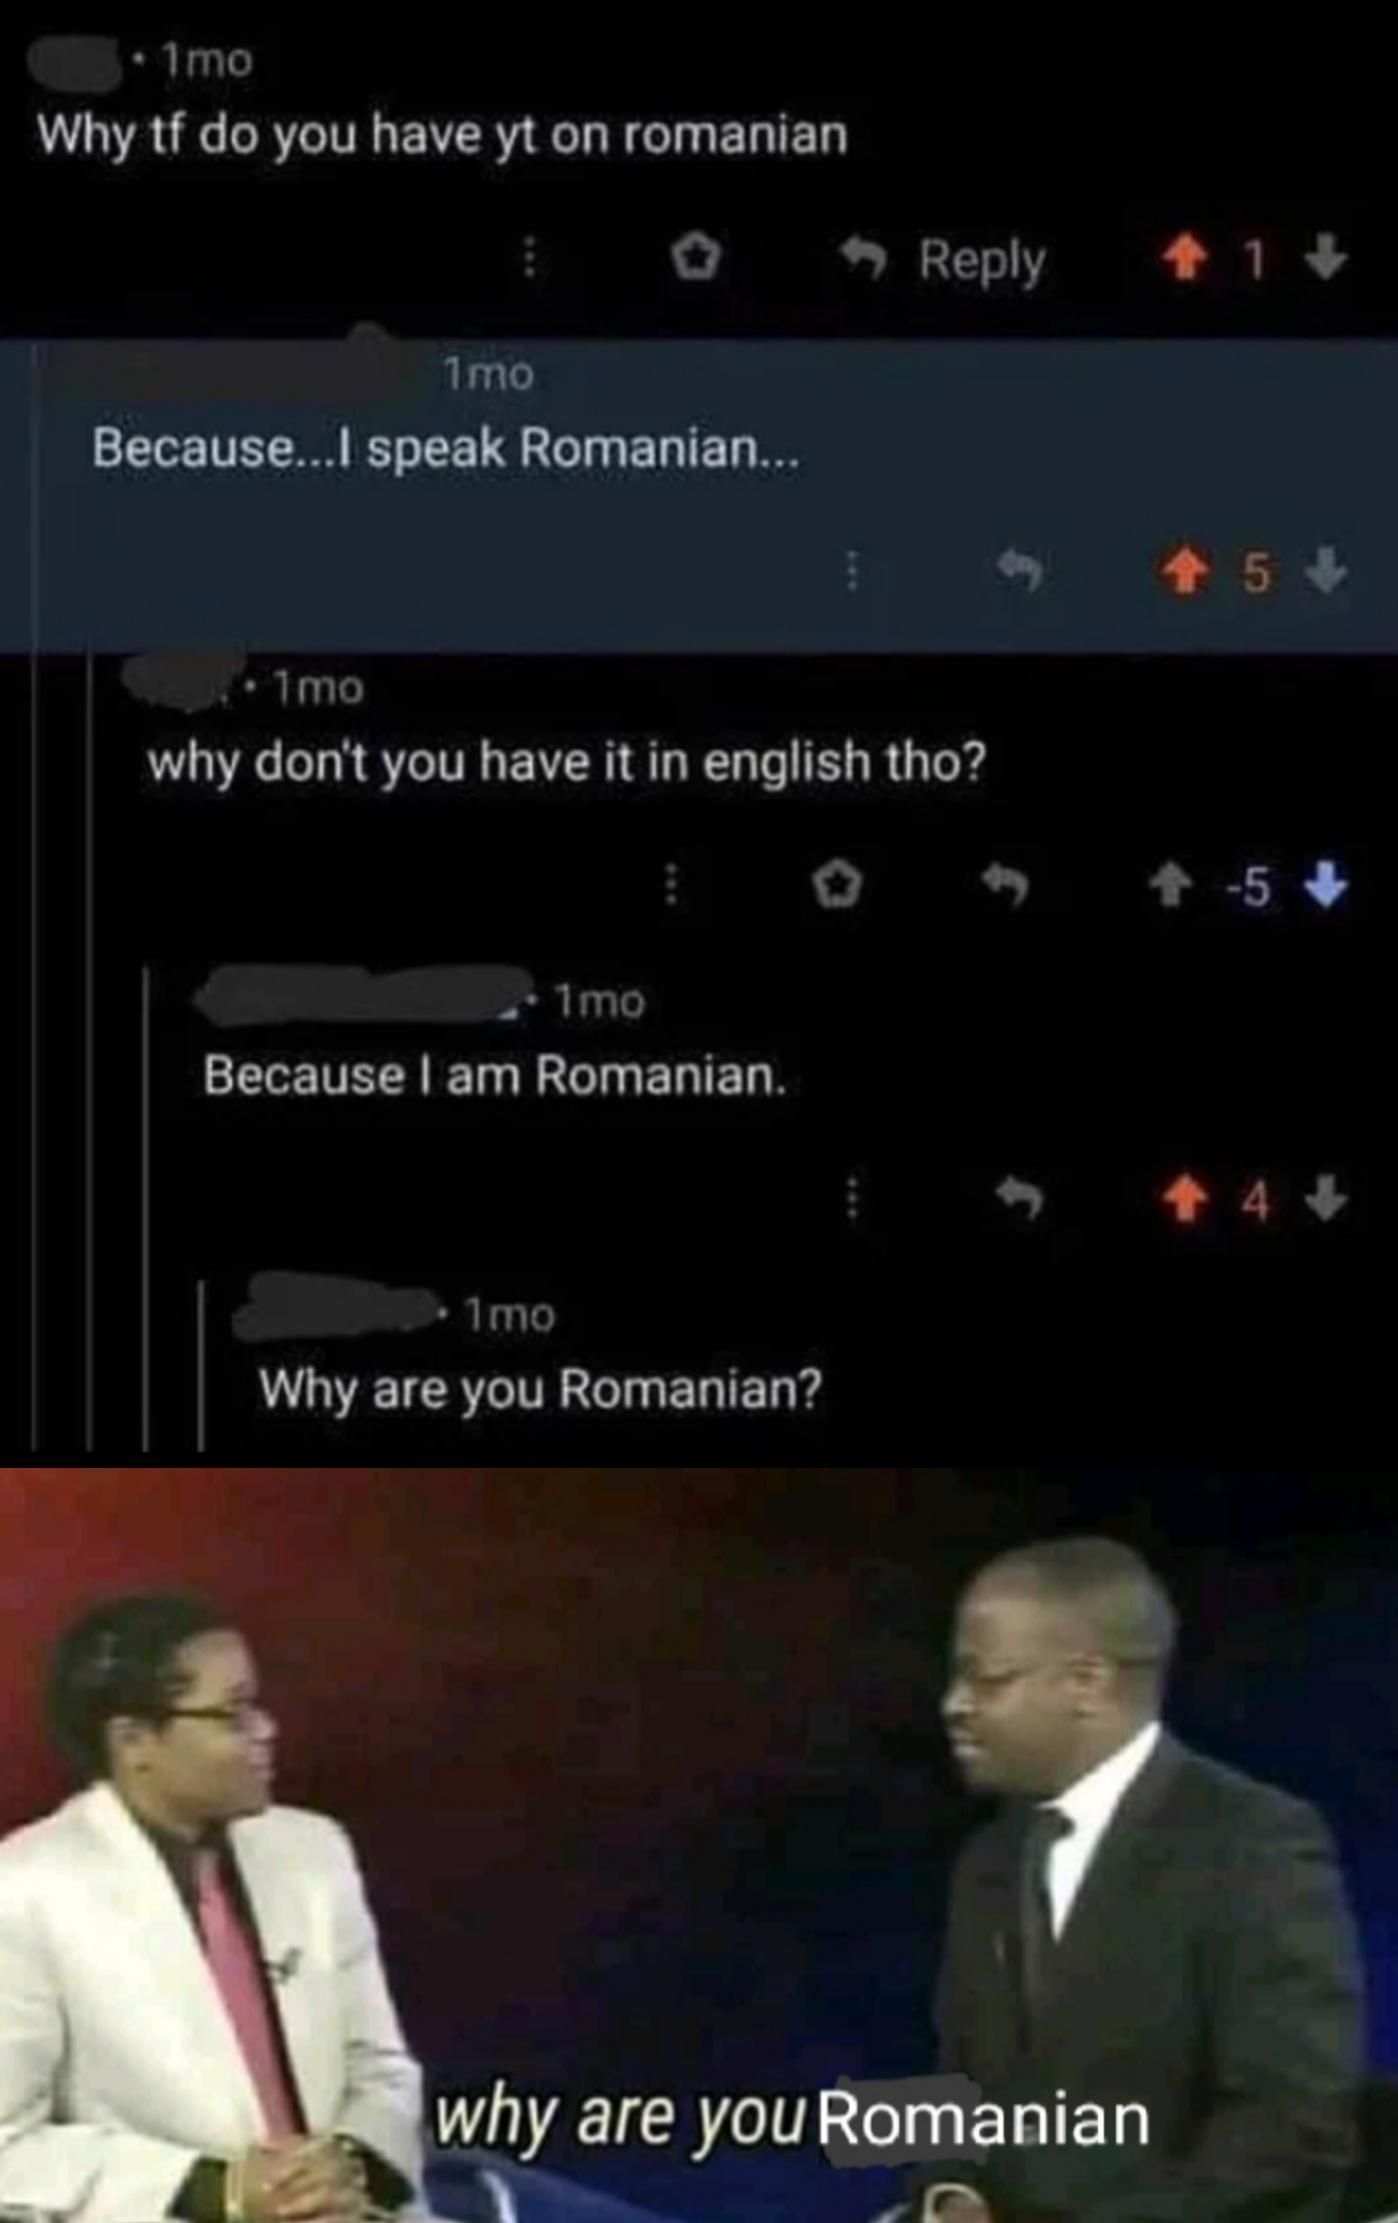 Why are you Romanian